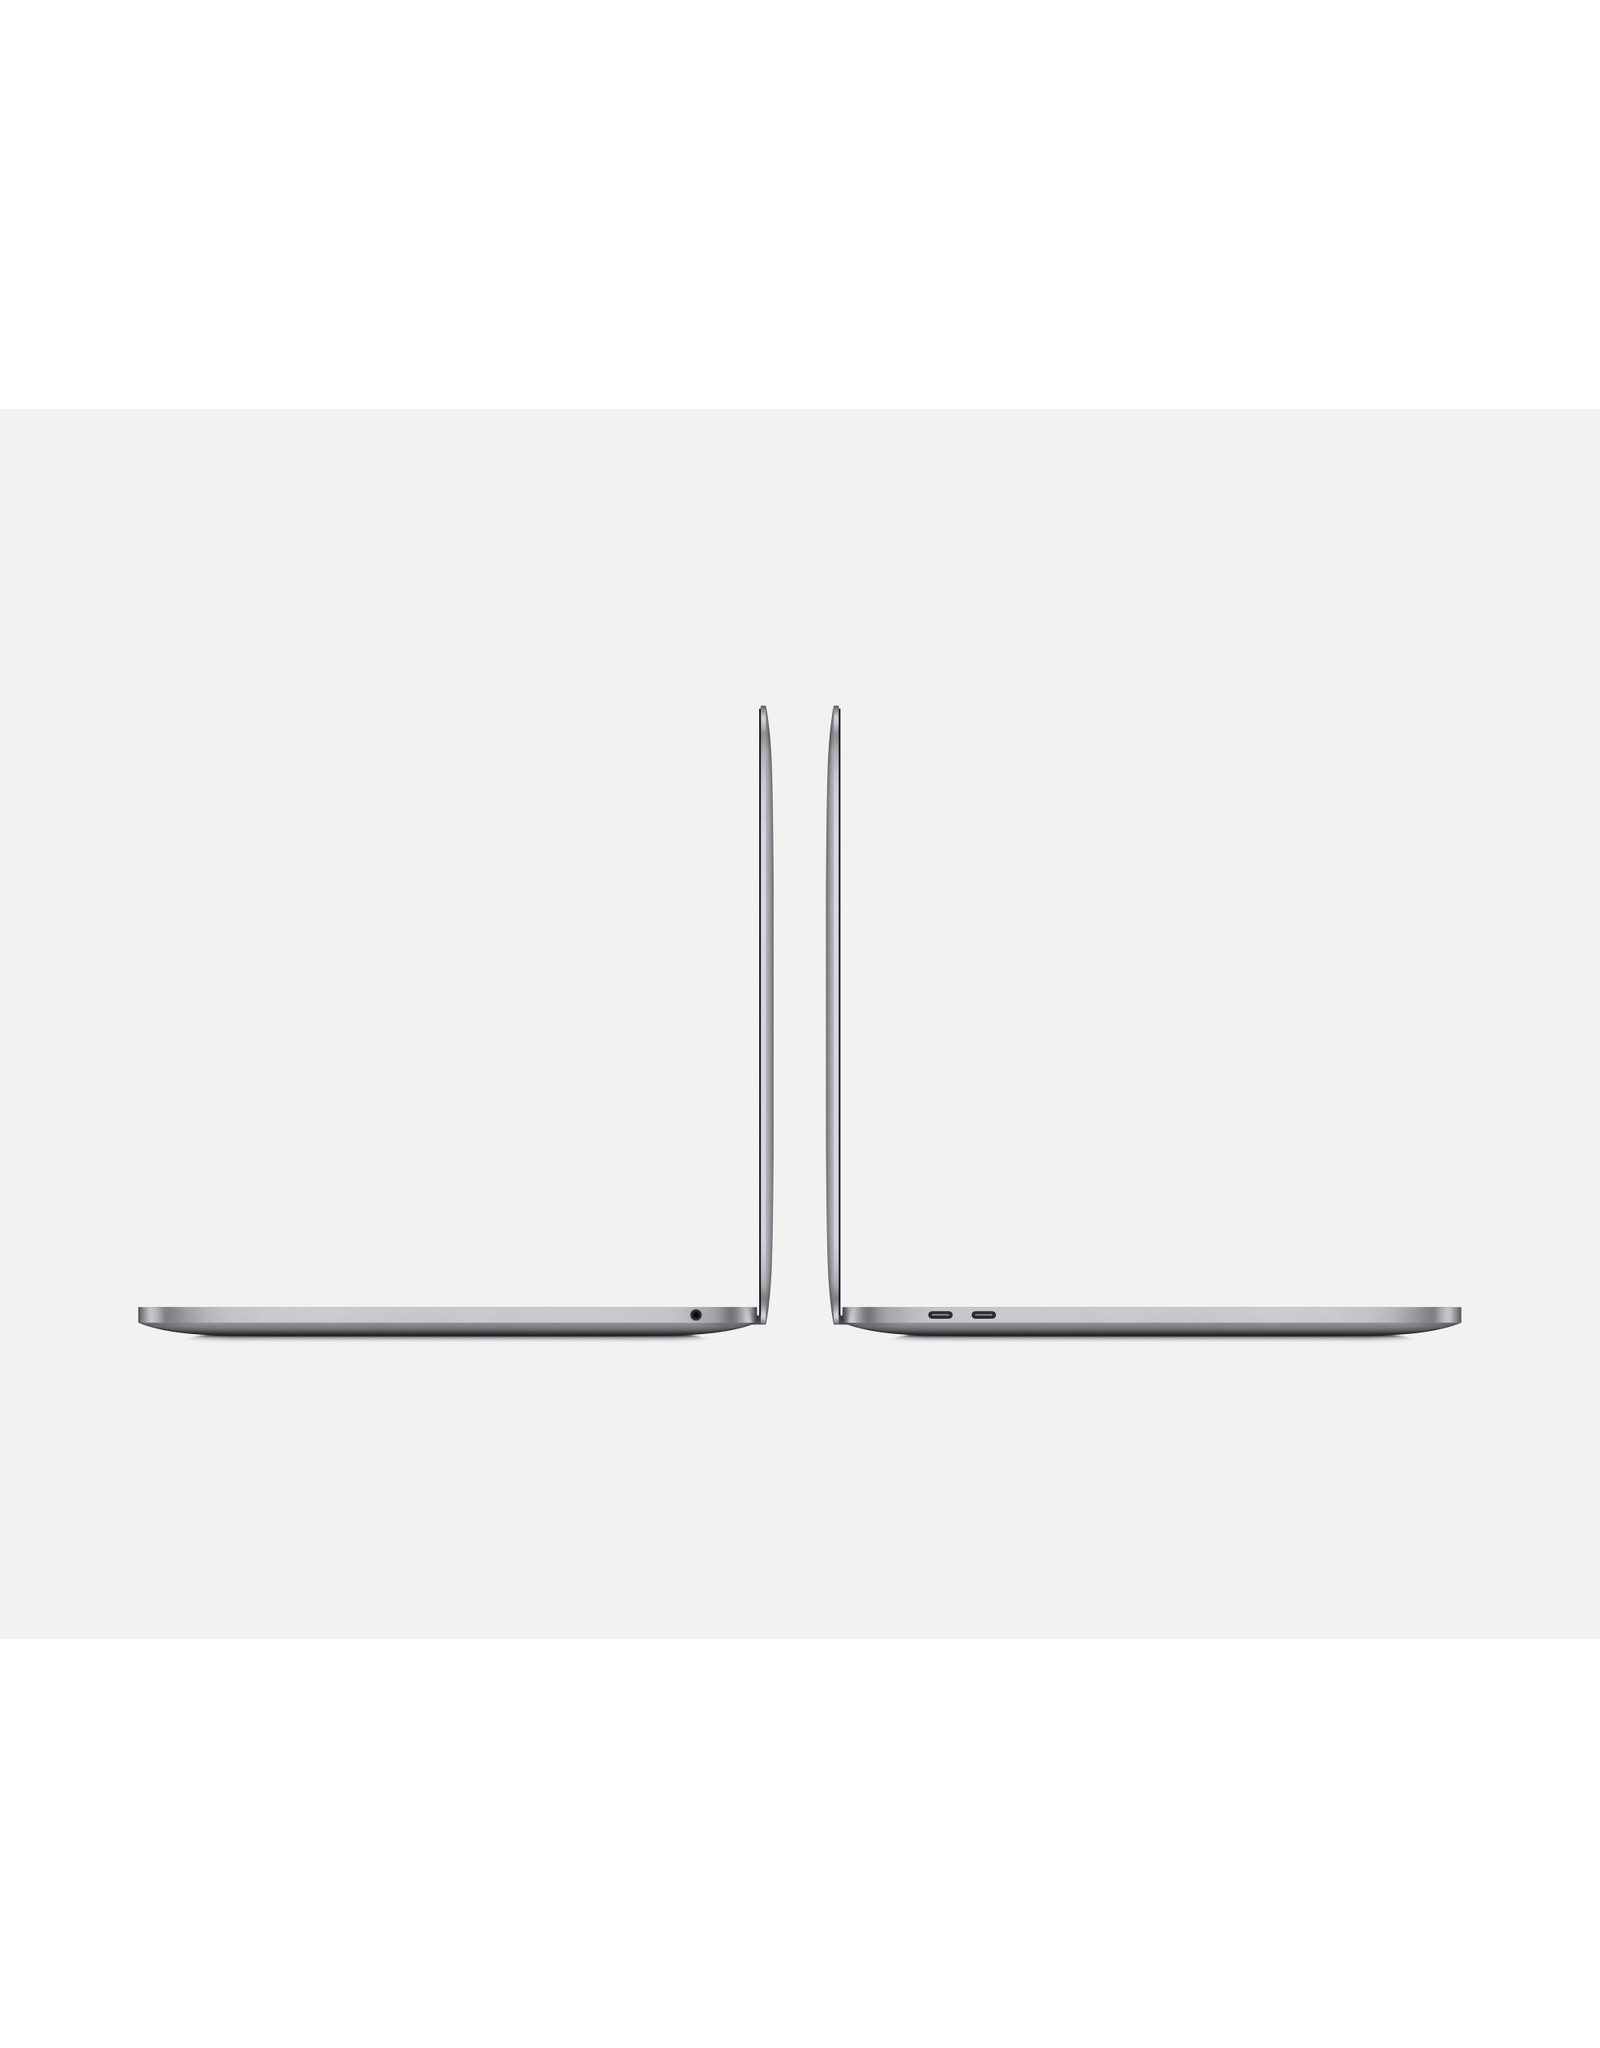 APPLE REDUCED SPACE GRAY 13-INCH MACBOOK PRO: APPLE M2 chip with 8-core CPU and 10-core GPU, 512GB SSD